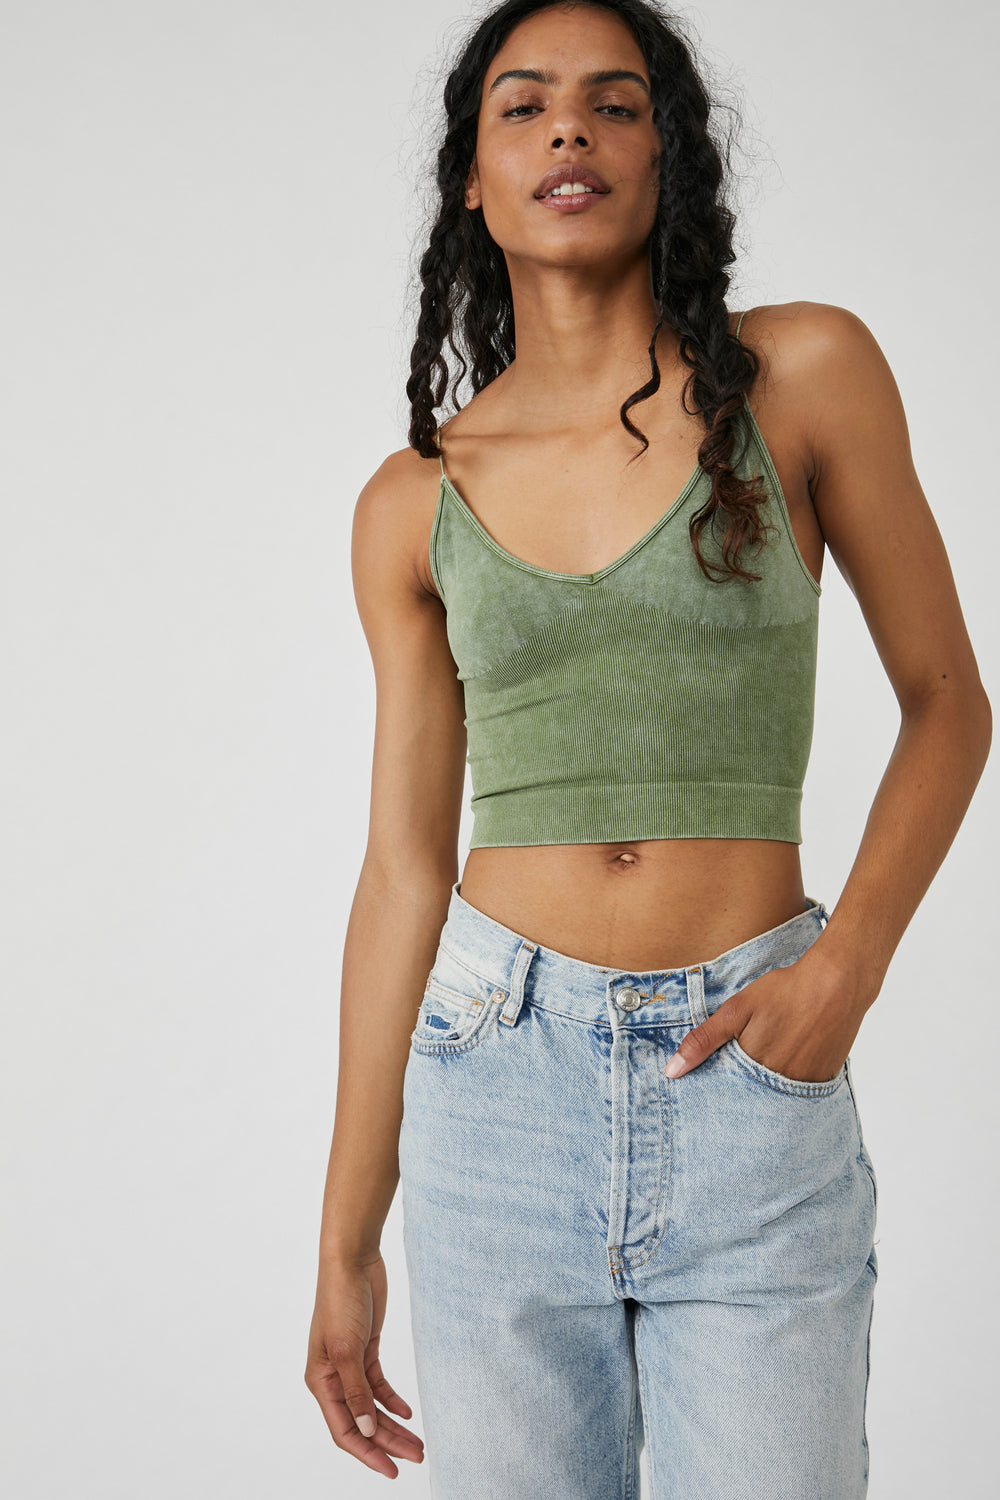 Free People Bella Seamless Rib Tank – Dales Clothing for Men and Women